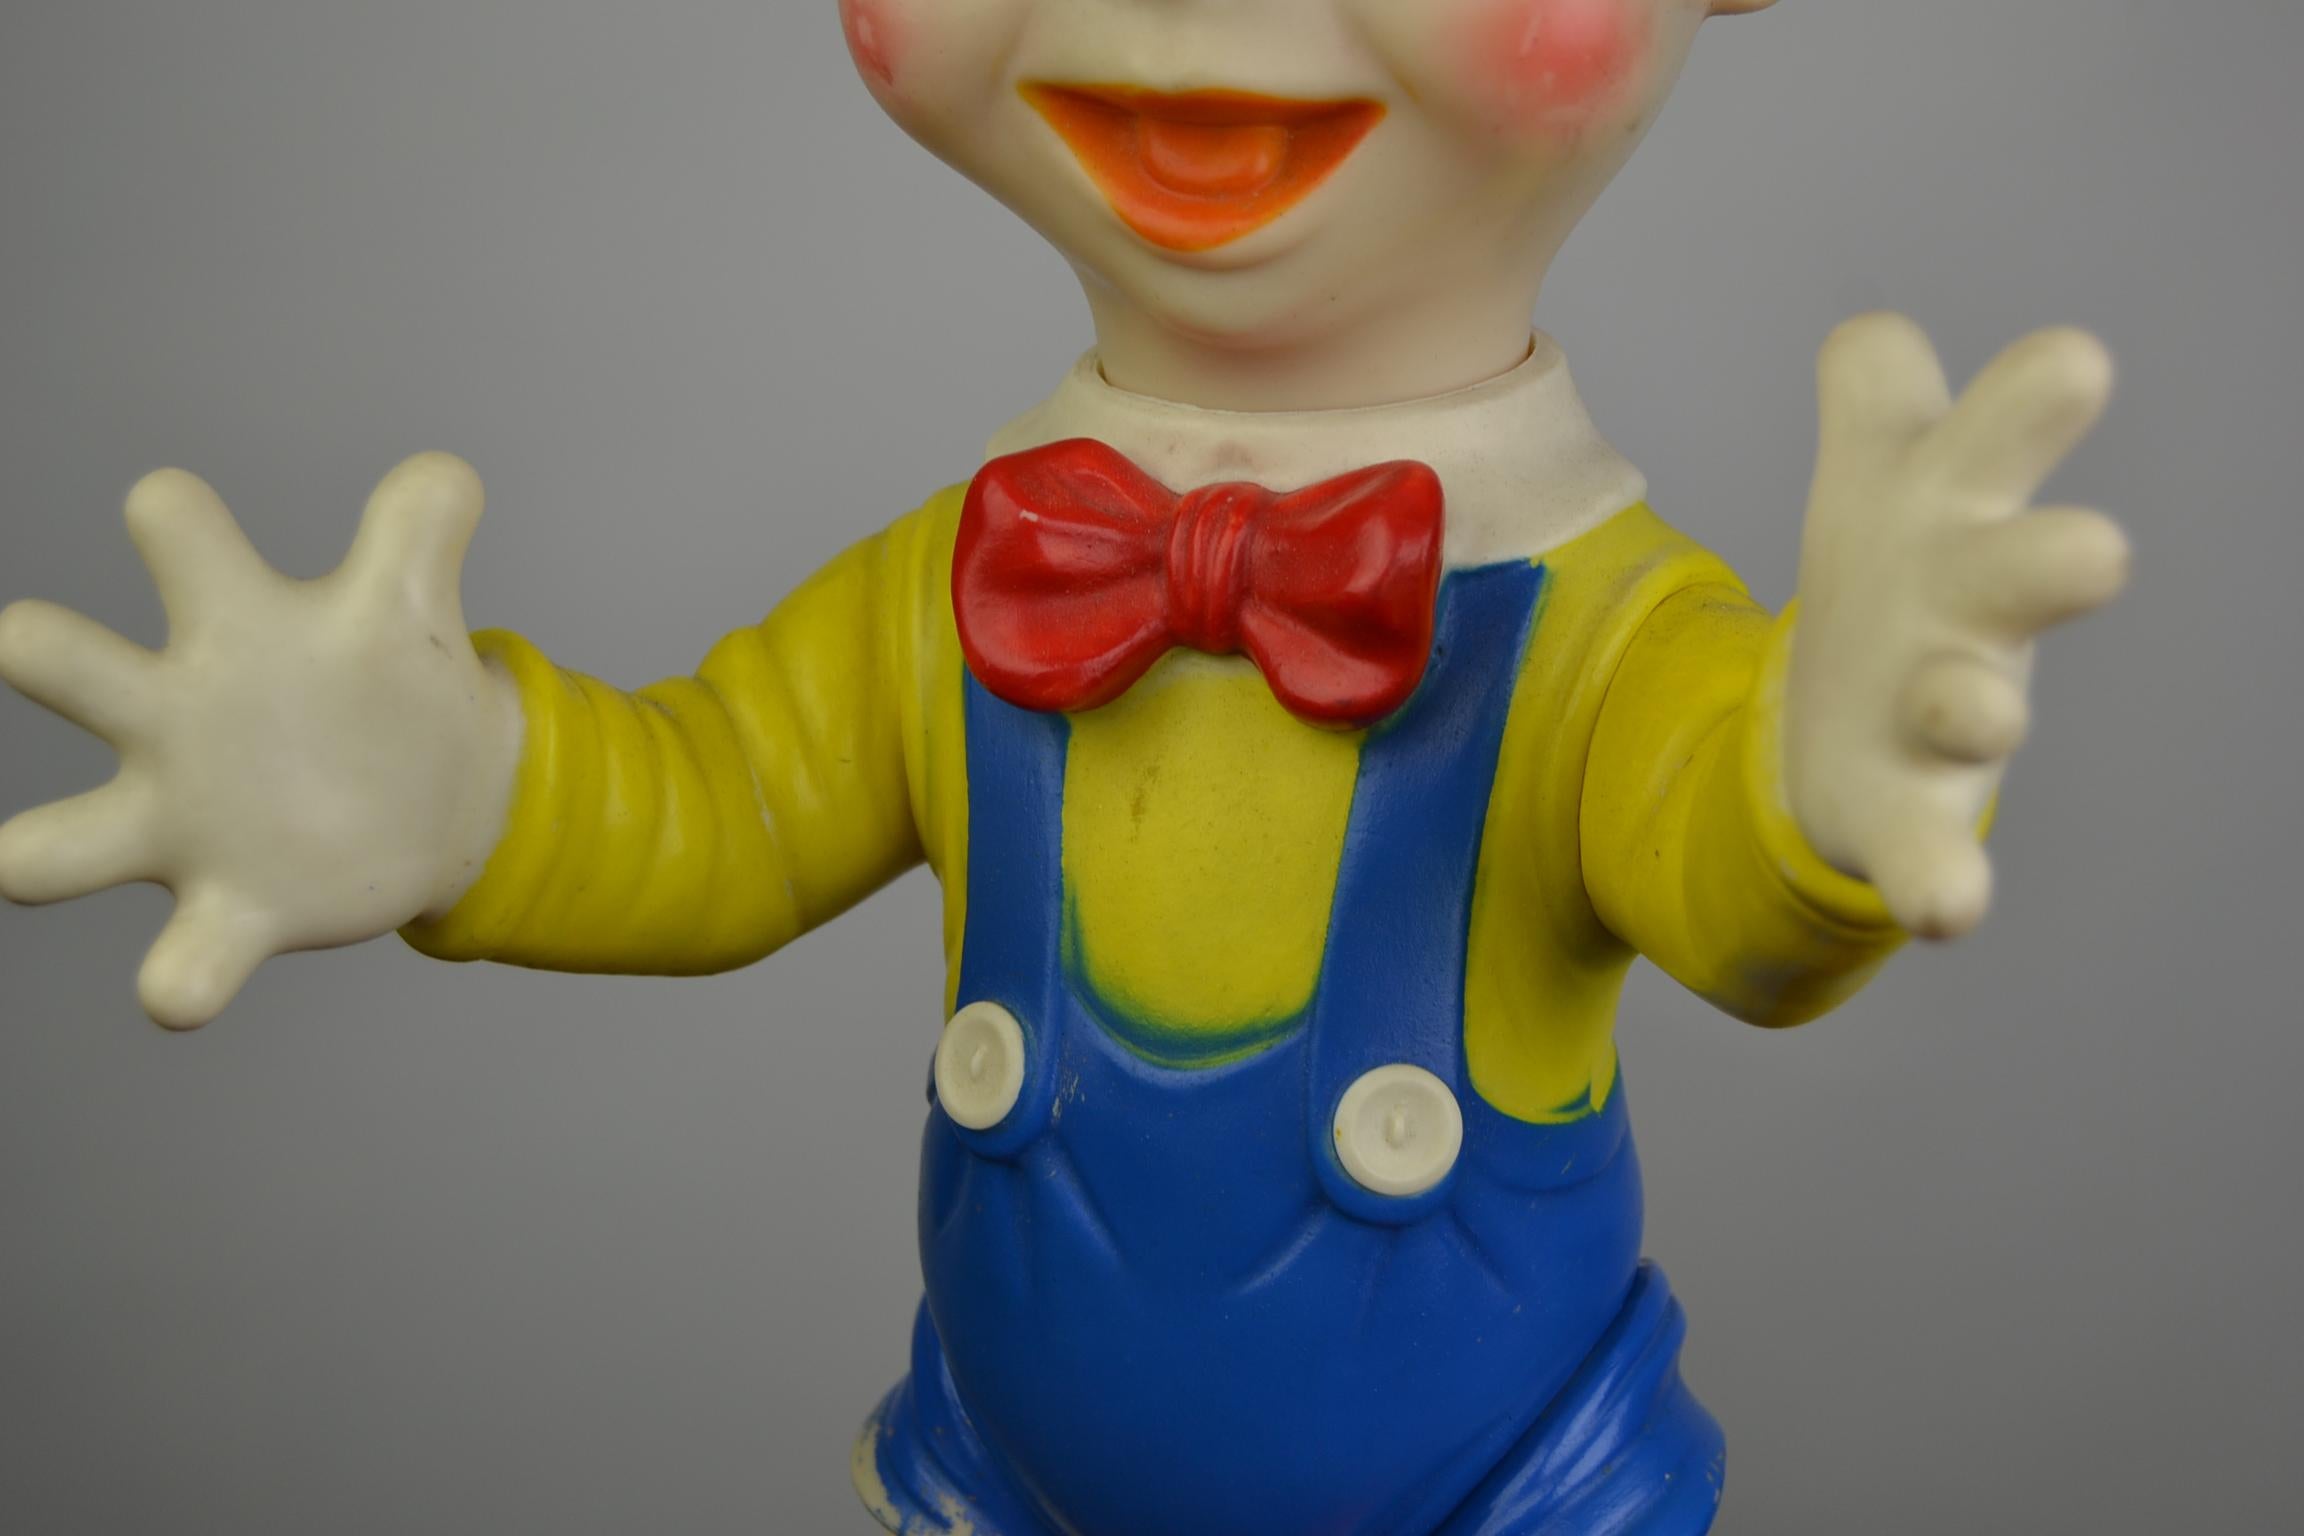 Italian Large Rubber Pinocchio Squeaky Toy by Ledraplastic Italy, 1960s